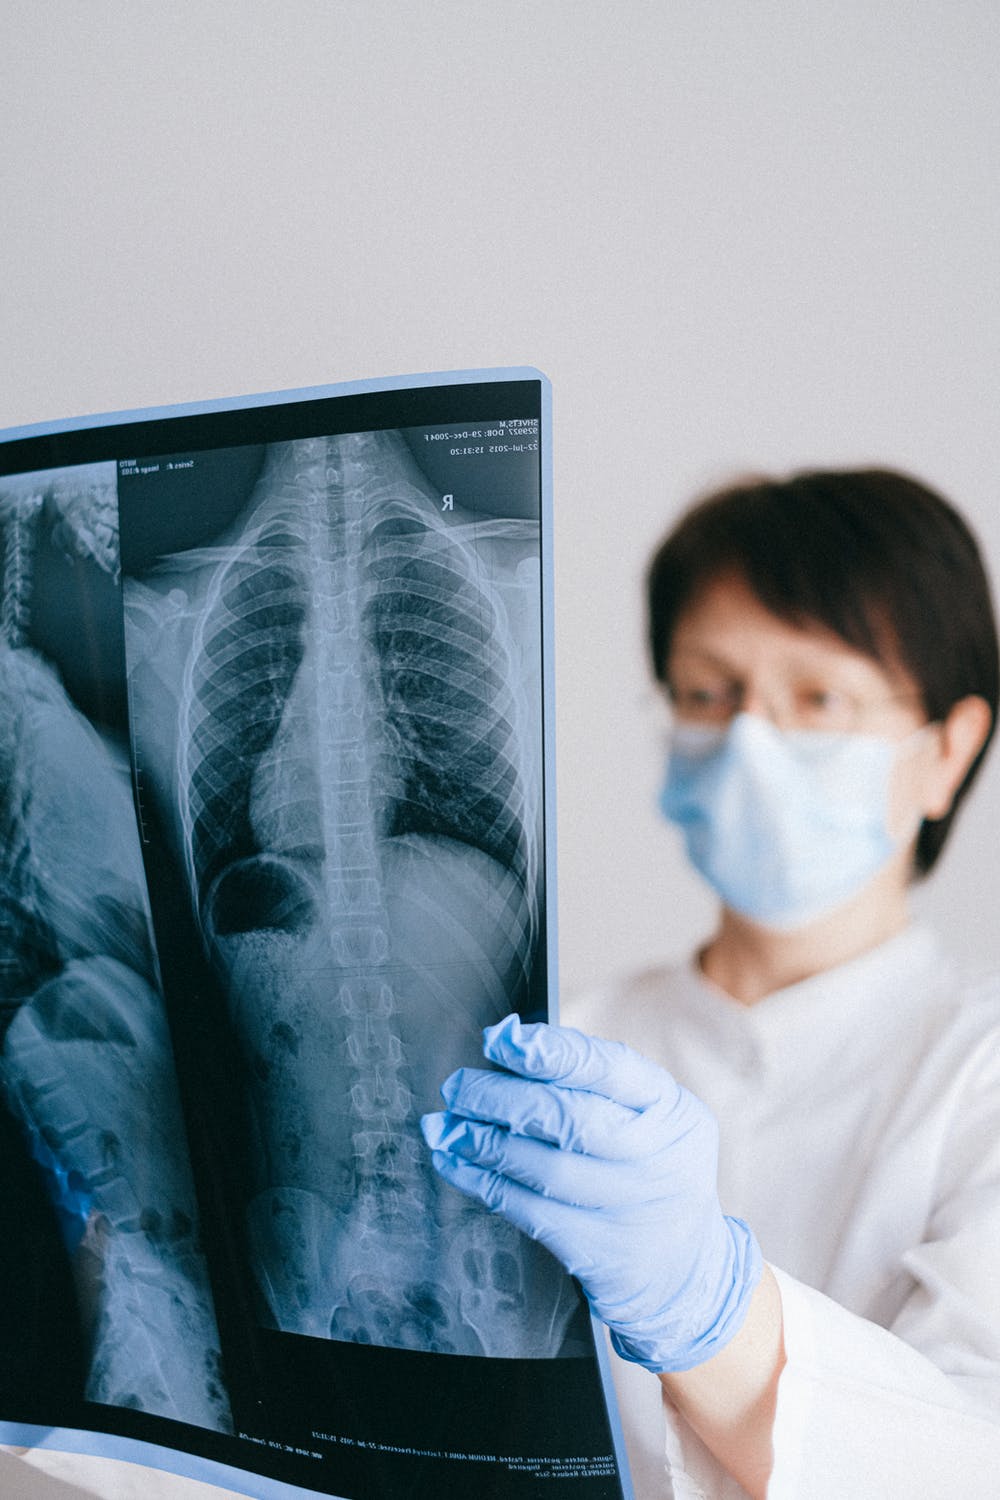 The doctor took X-rays of Mrs. Ross' arm | Source: Pexels